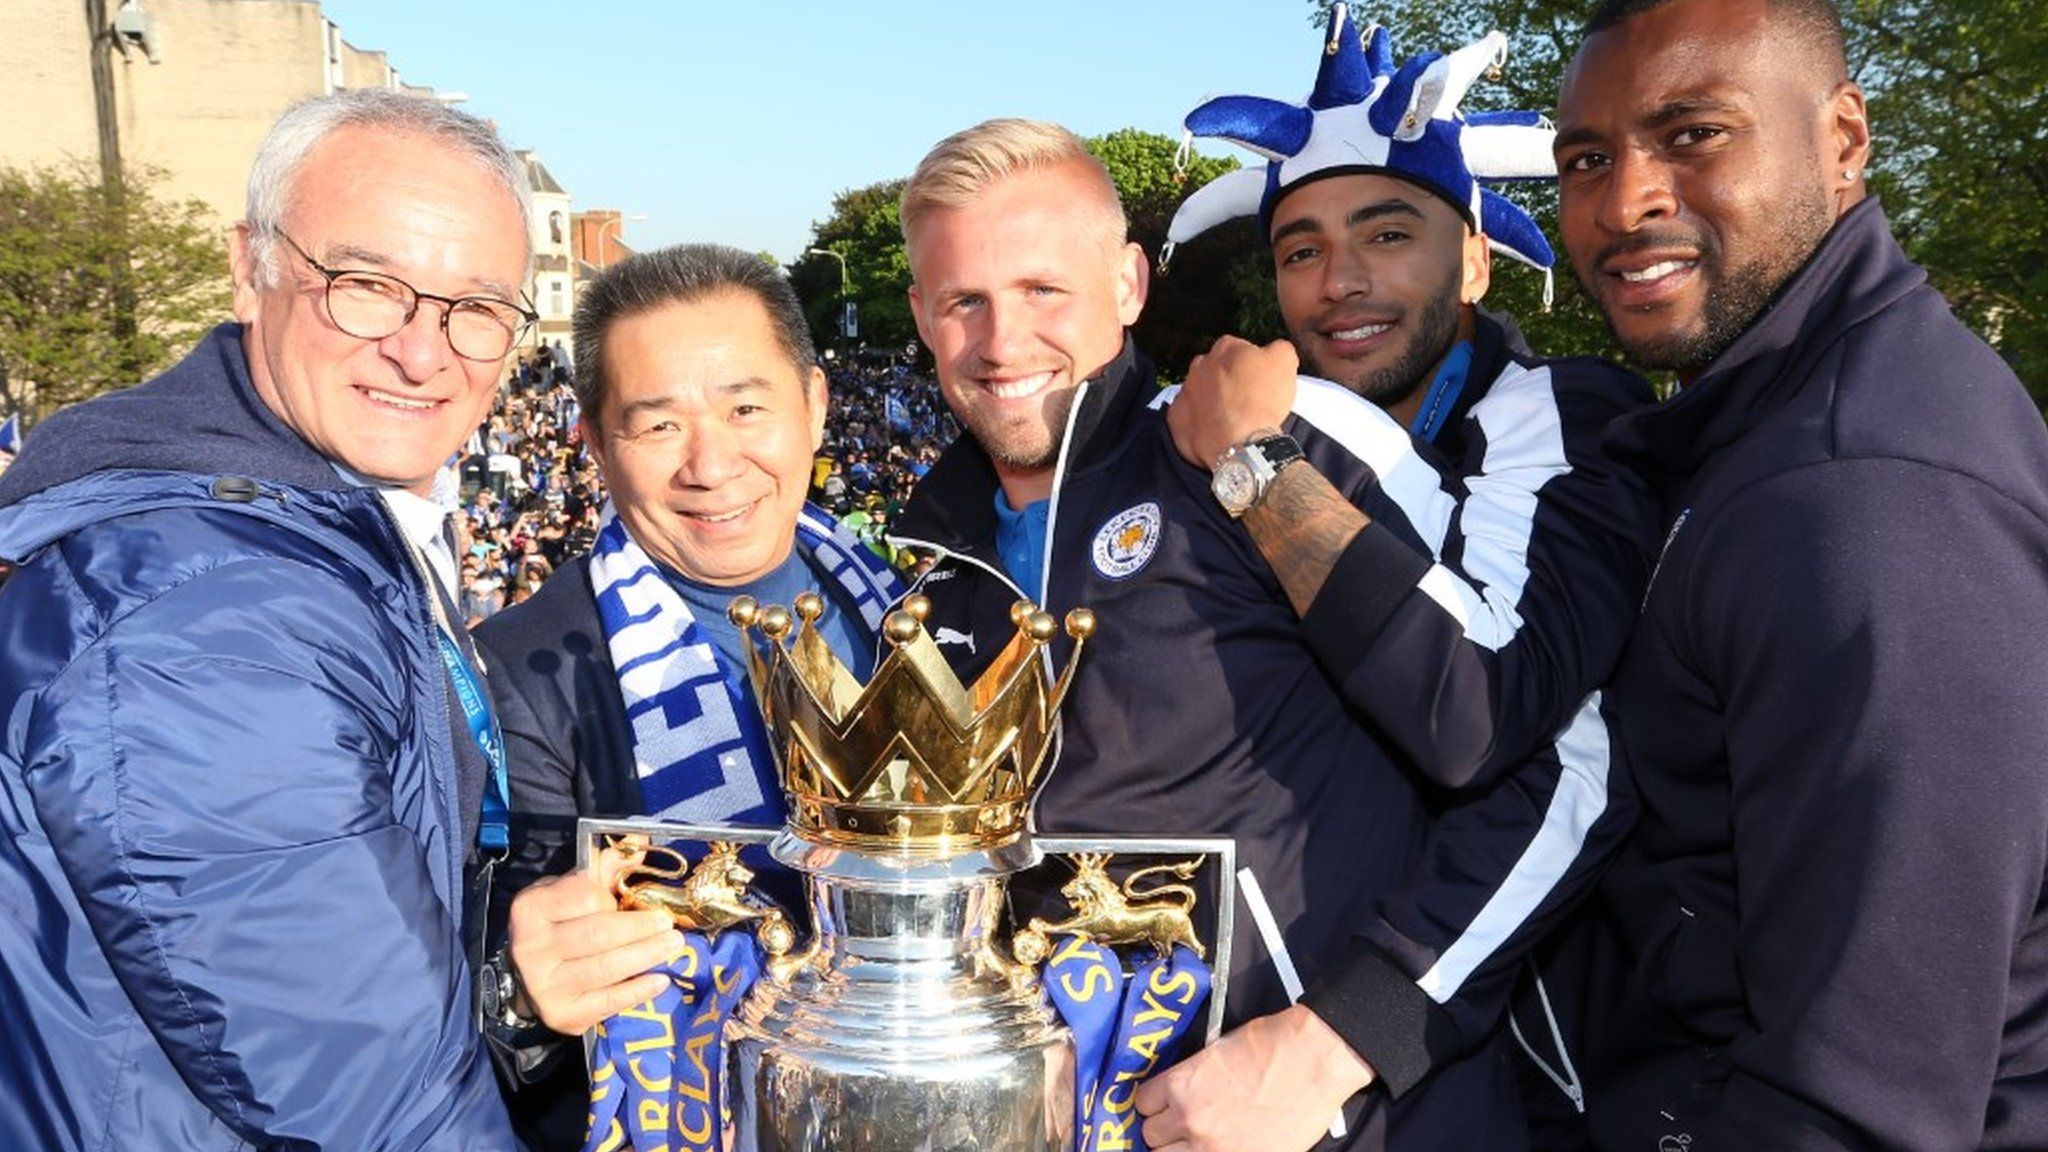 Manager Claudio Ranieri, Chairman Vichai Srivaddhanaprabha, Kasper Schmeichel, Danny Simpson and Wes Morgan of Leicester City during the Leicester City Barclays Premier League Winners Bus Parade in Leicester City on May 16th, 2016 in Leicester